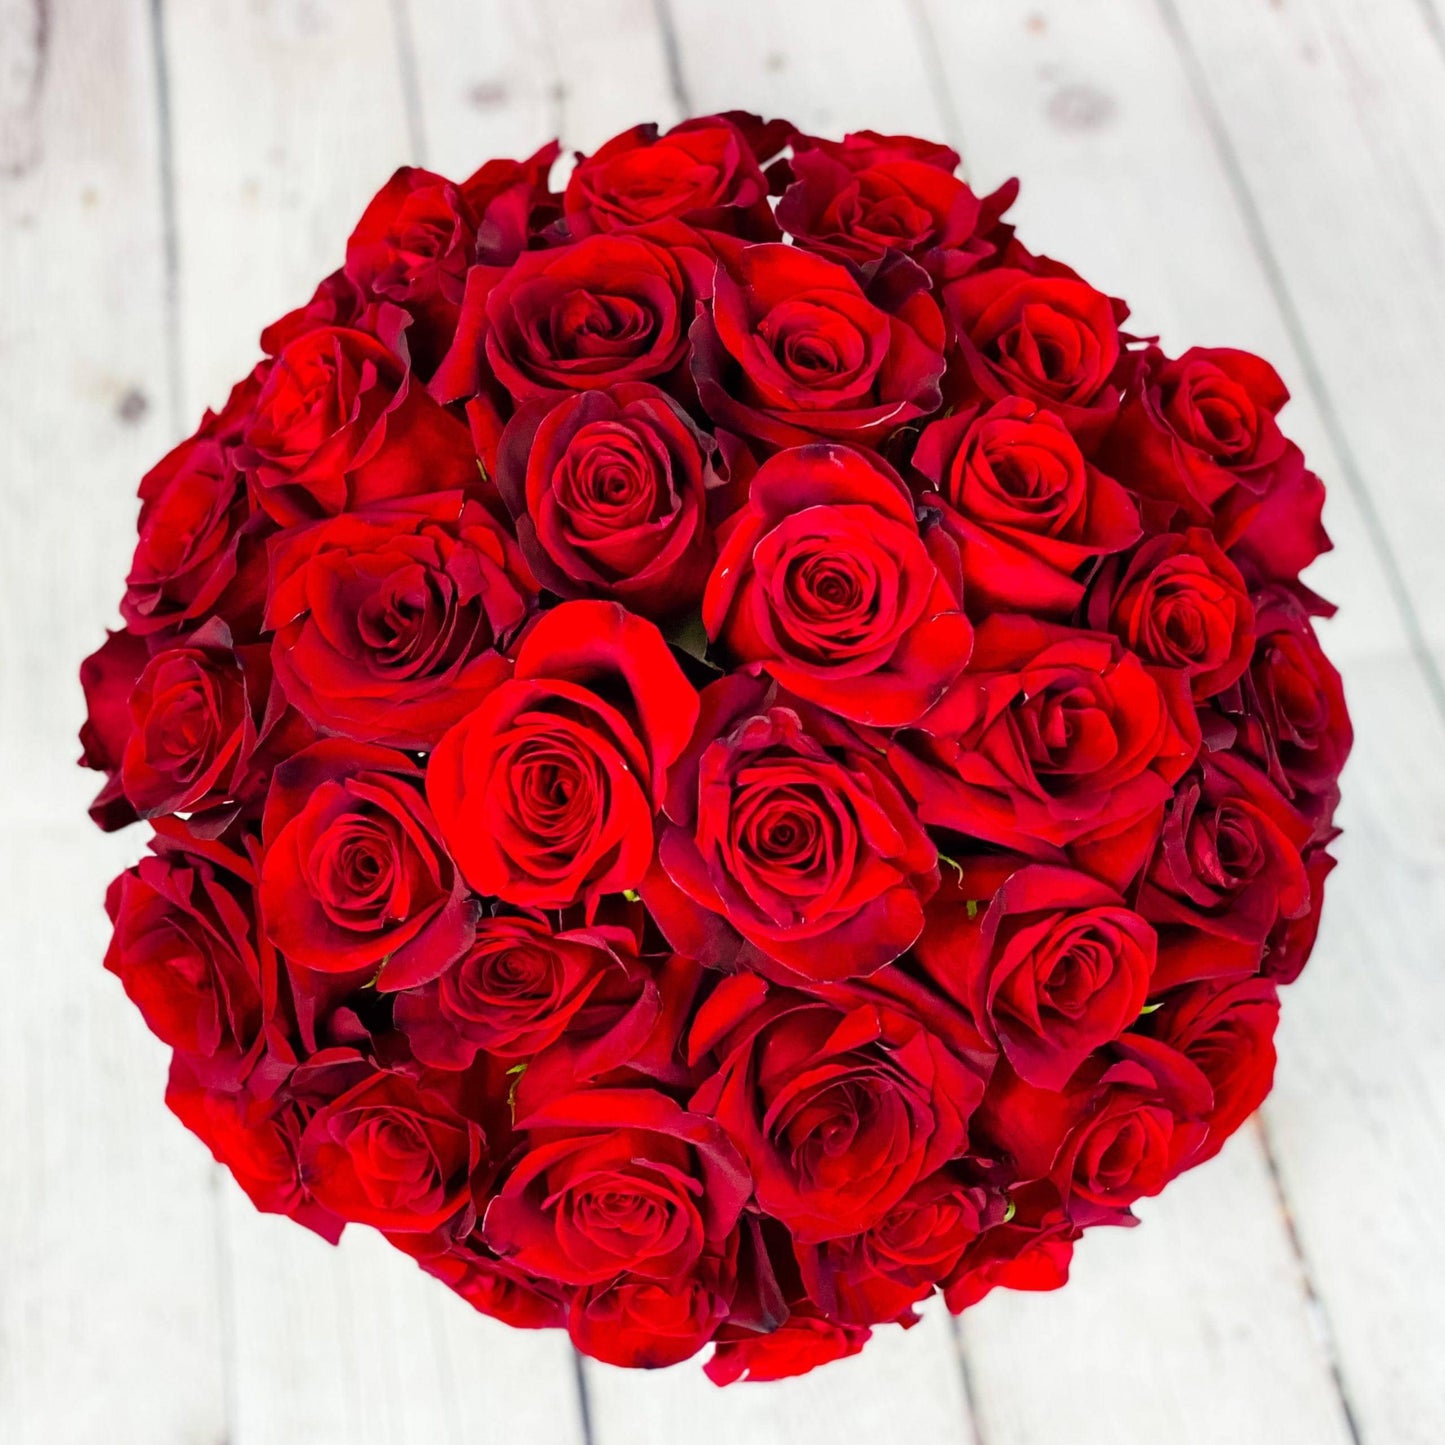 Red Rose Dome by DGM Flowers - DGM Flowers  | Fort Lauderdale Florist